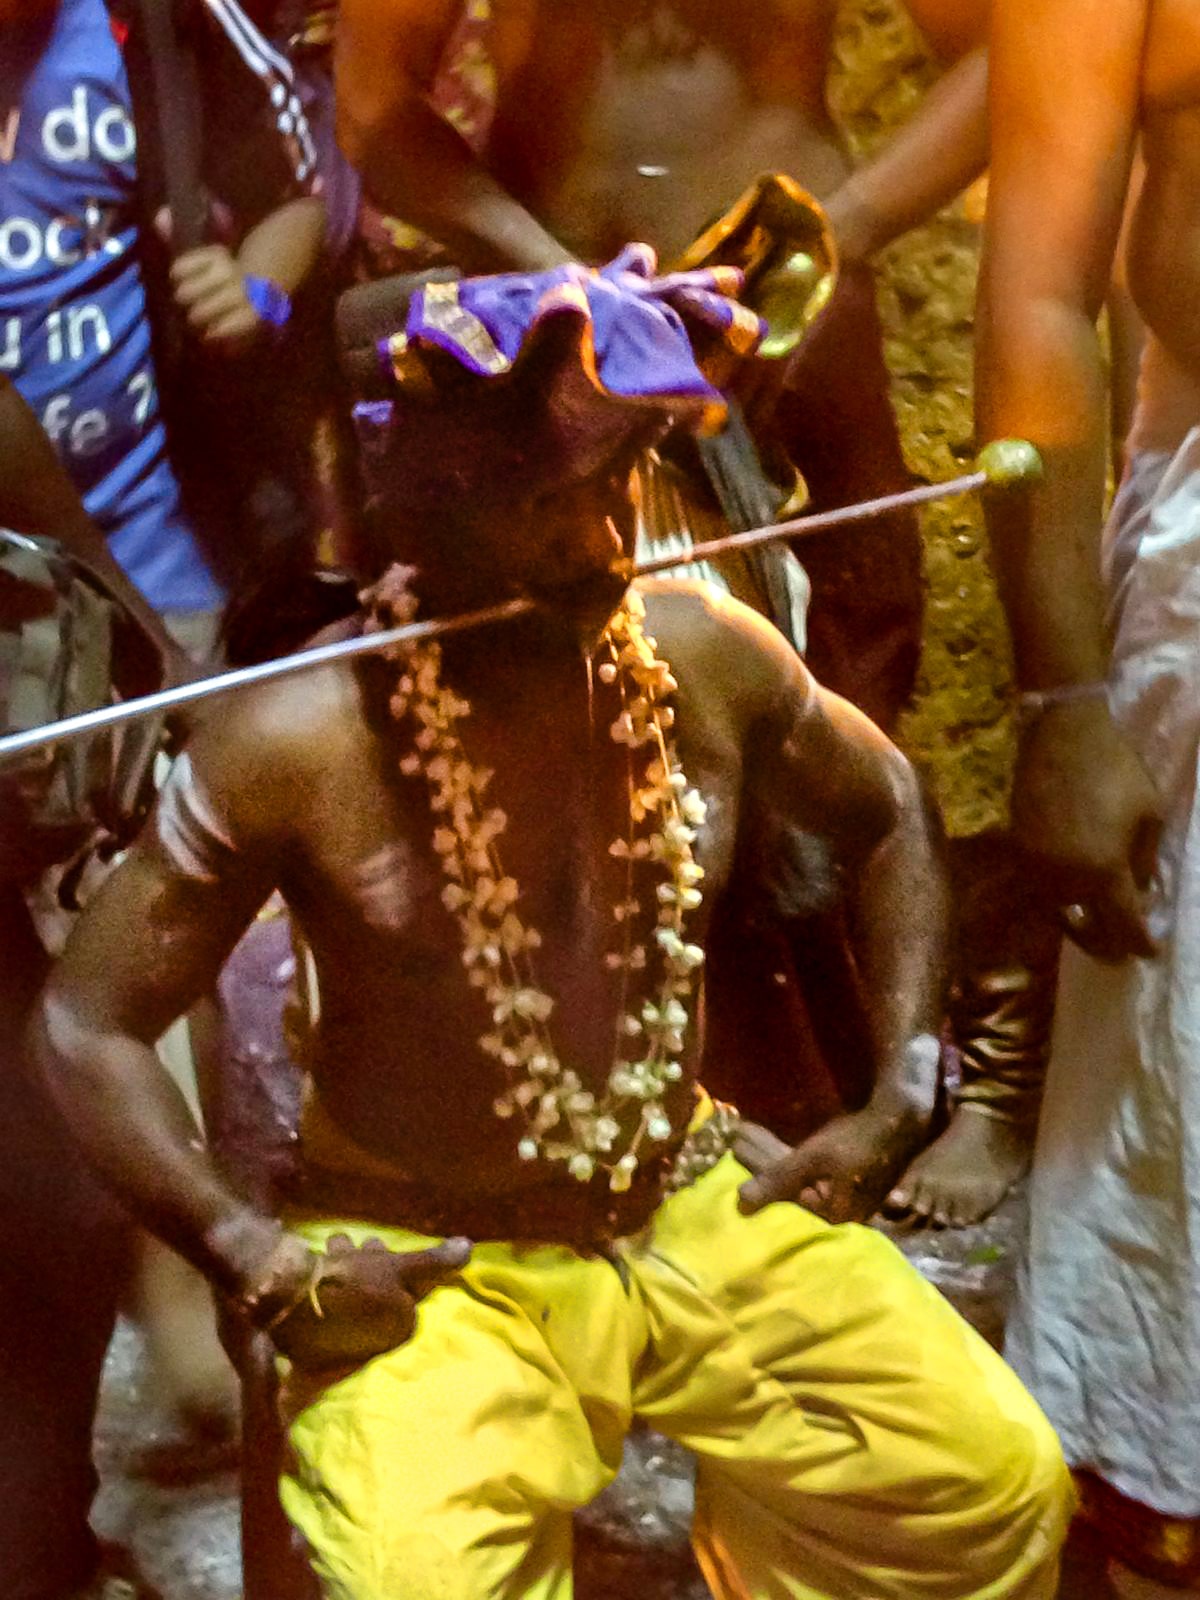 A Hindu man in yellow trousers sits with a metal pole through his cheeks at the Thaipusam Festival in Batu Caves, just outside of Malaysia's capital city.